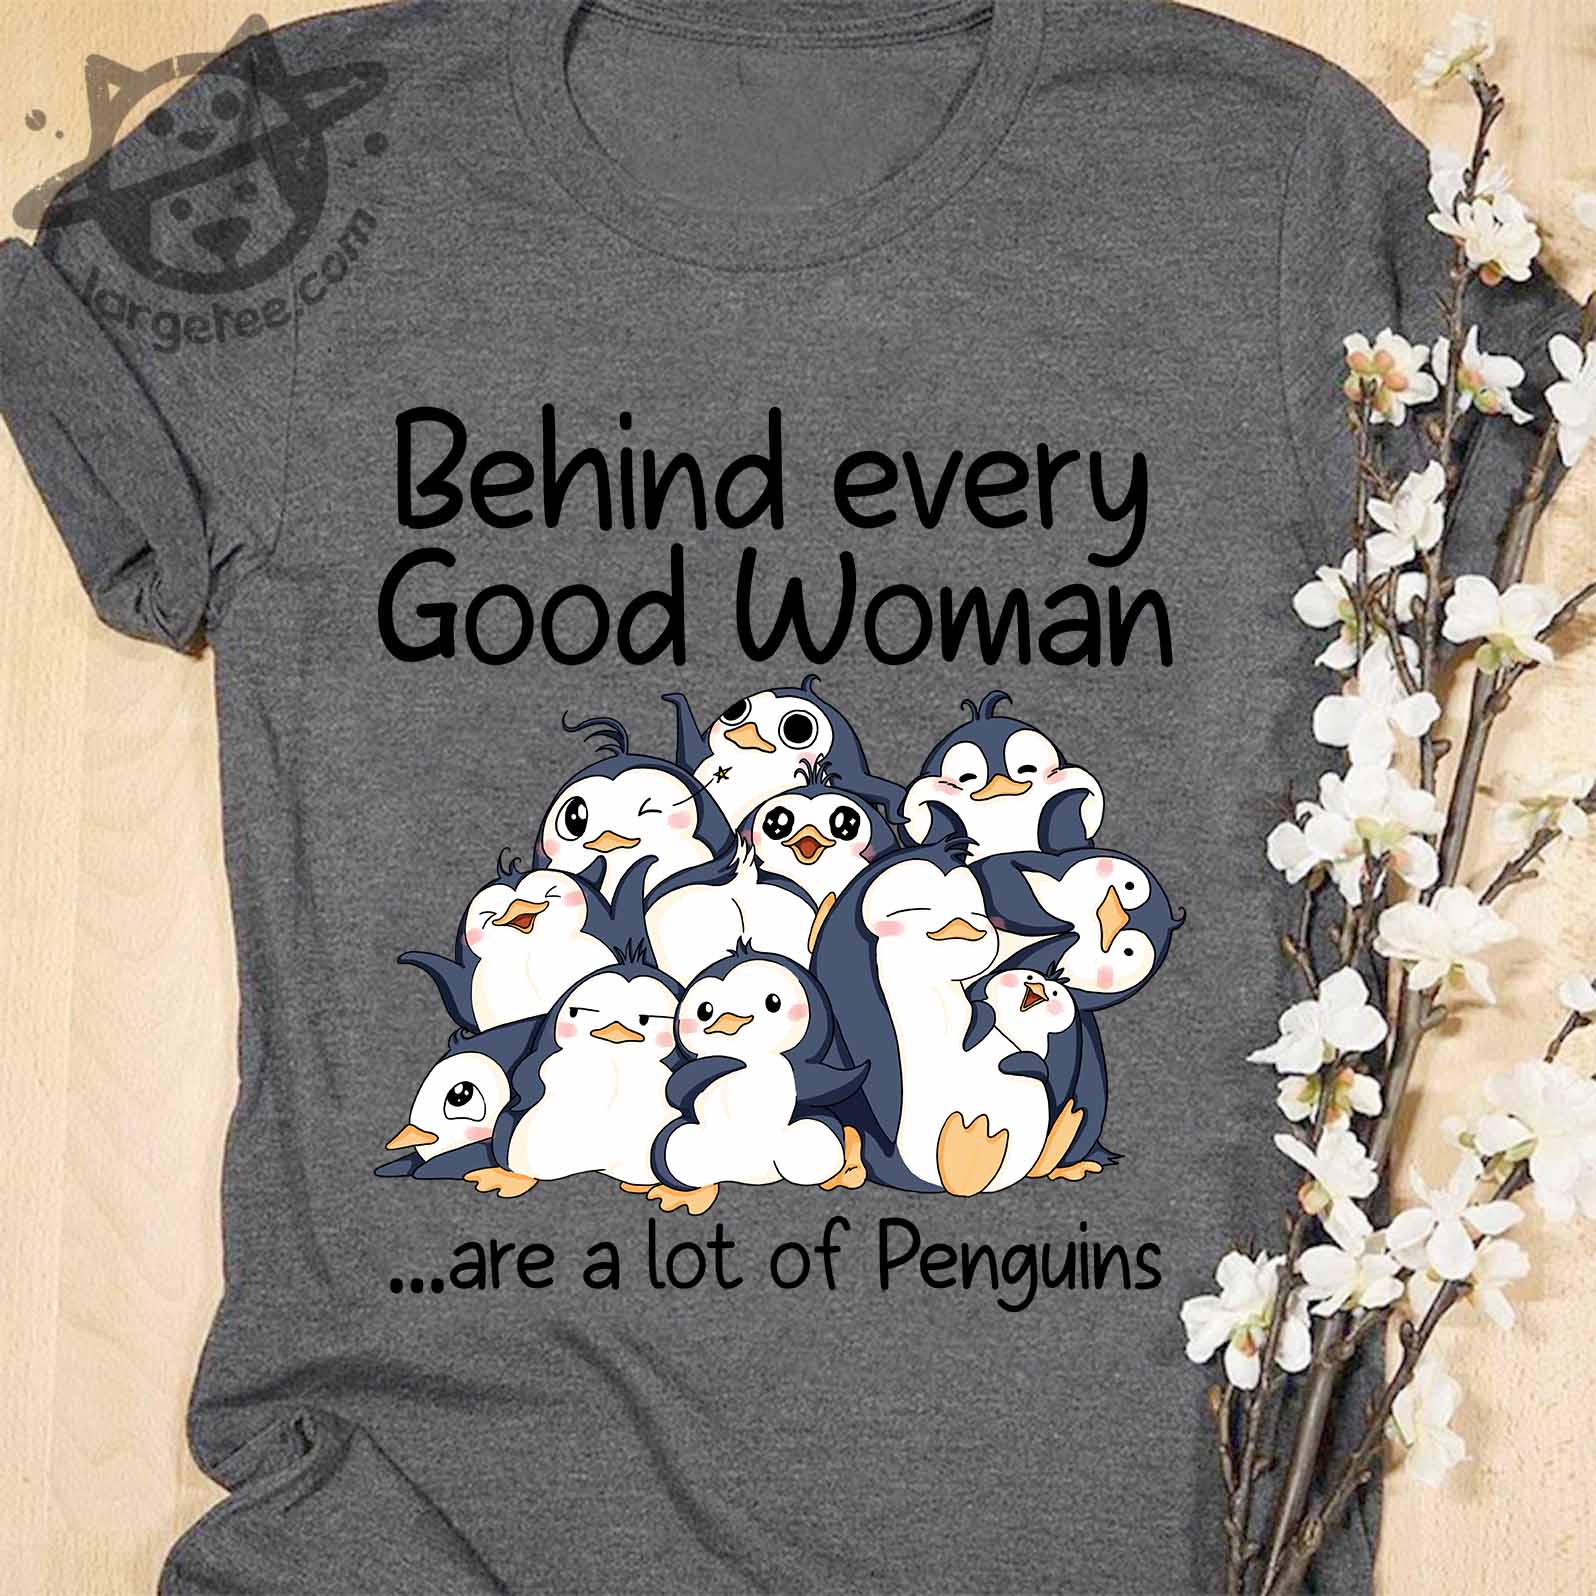 Behind every good woman are a lot of Penguins